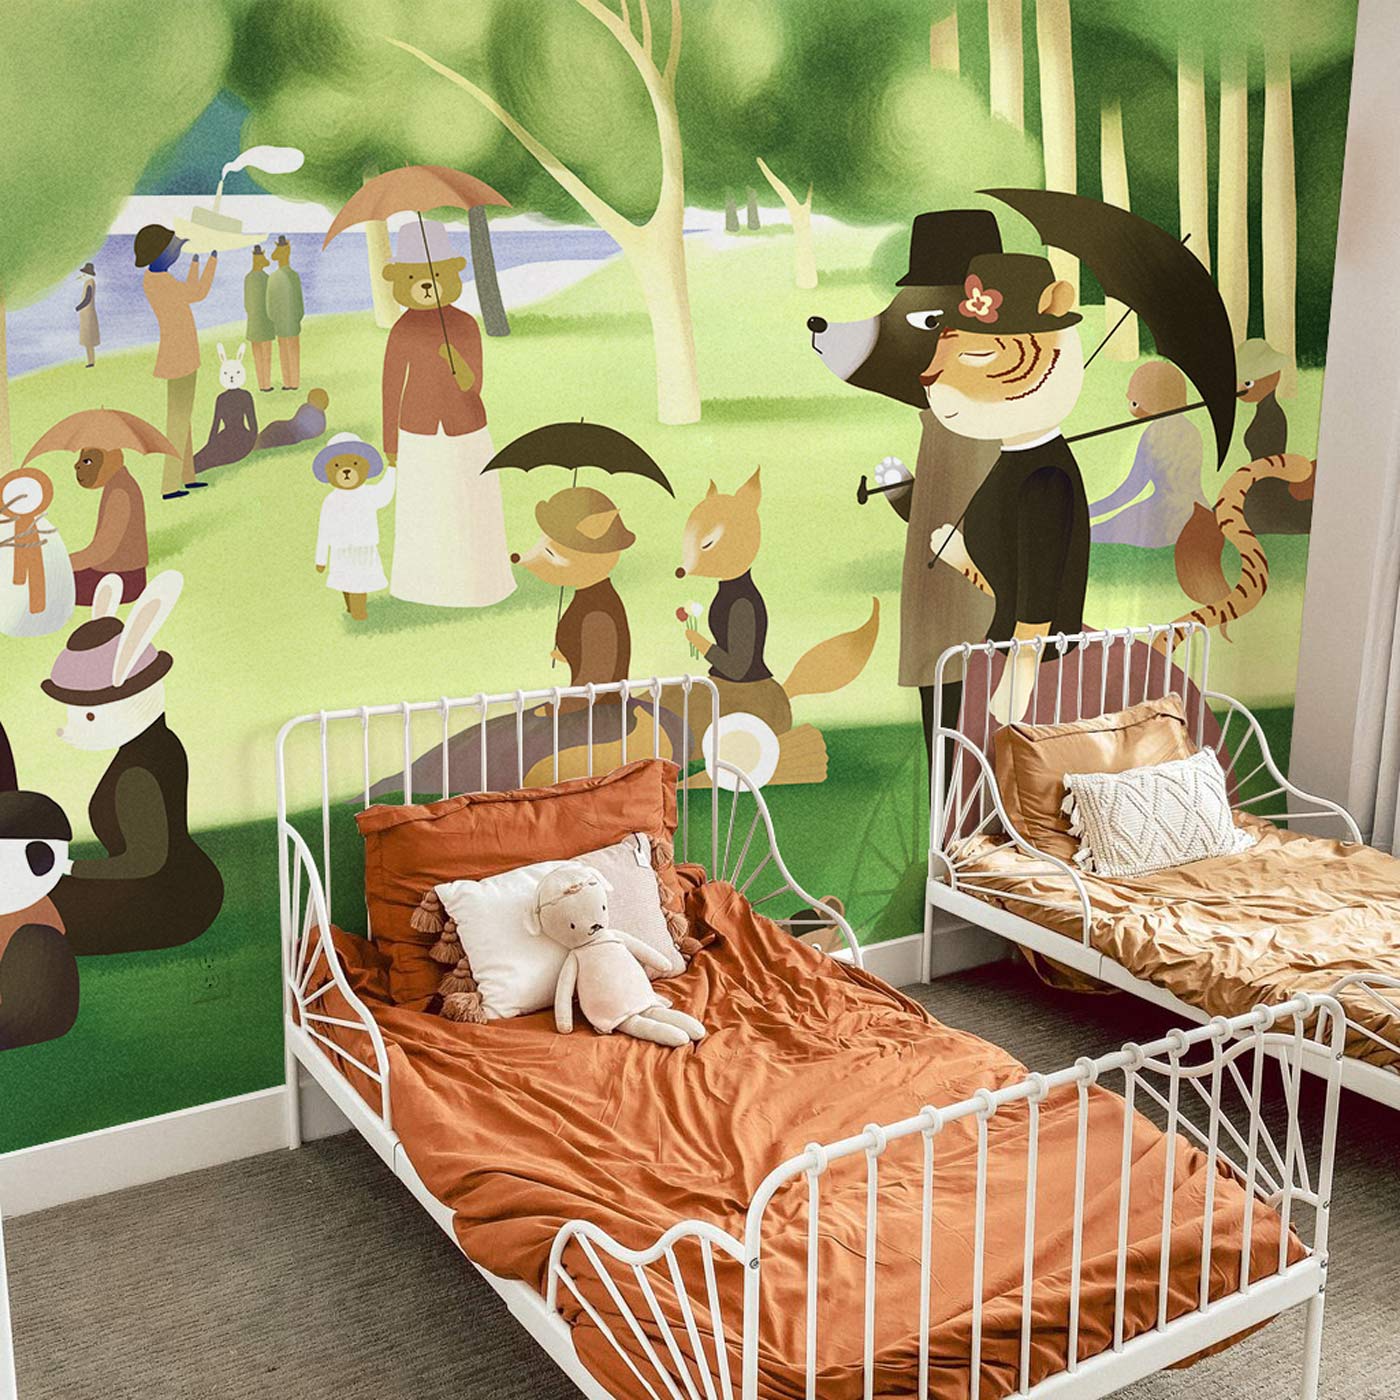 Wallpaper mural with animals in a park for use in decorating bedrooms.